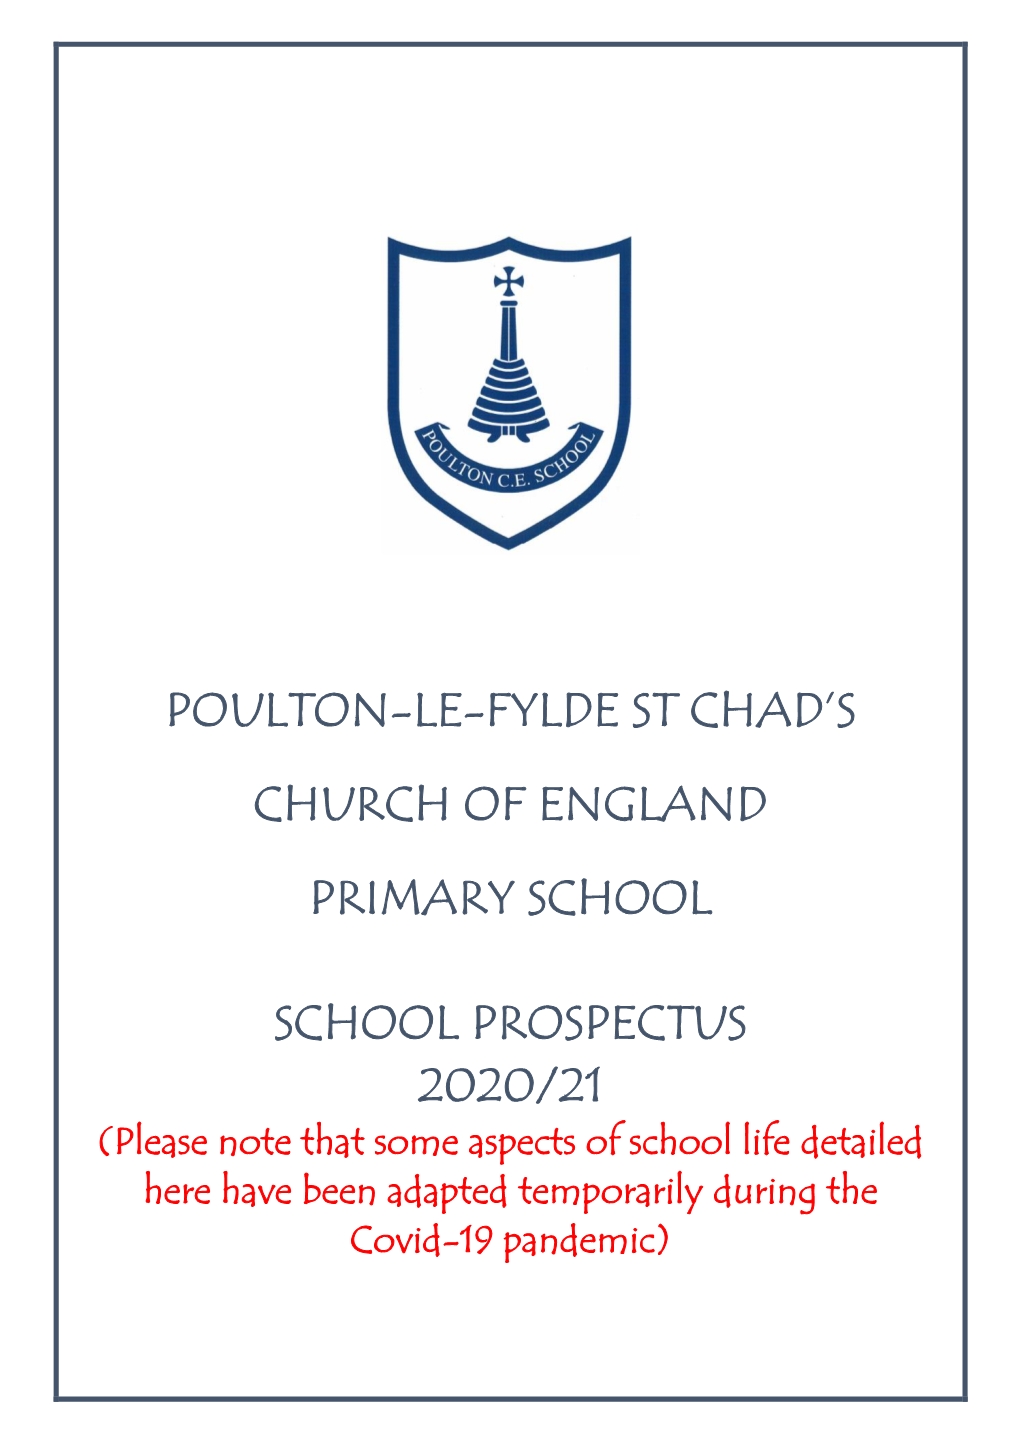 Poulton-Le-Fylde St Chad's Church of England Primary